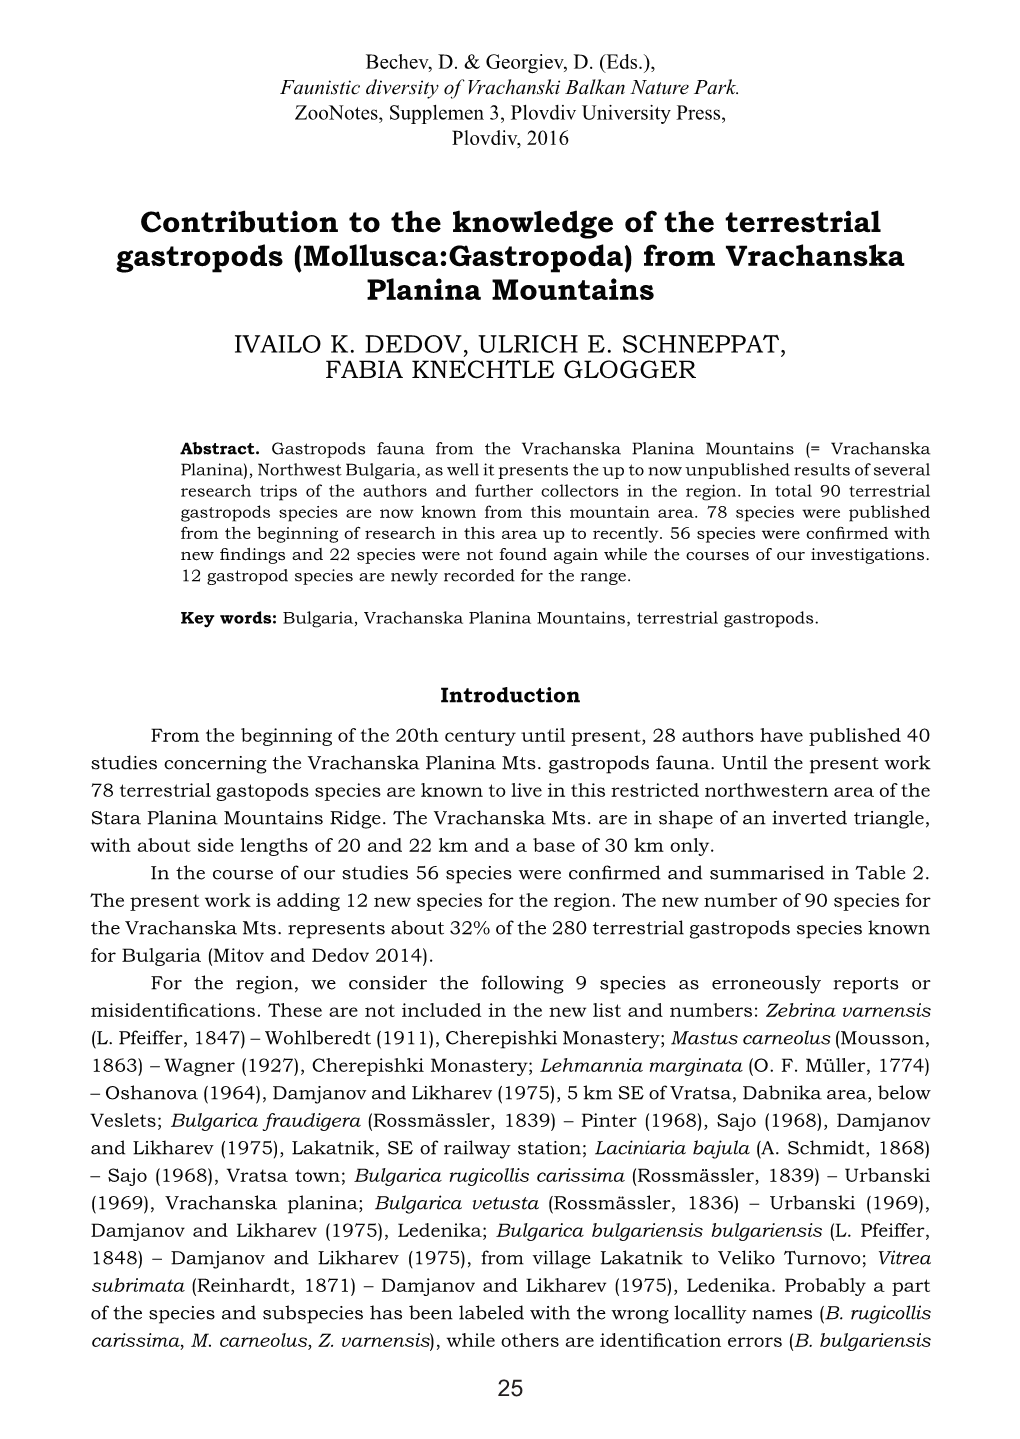 Contribution to the Knowledge of the Terrestrial Gastropods (Mollusca:Gastropoda) from Vrachanska Planina Mountains